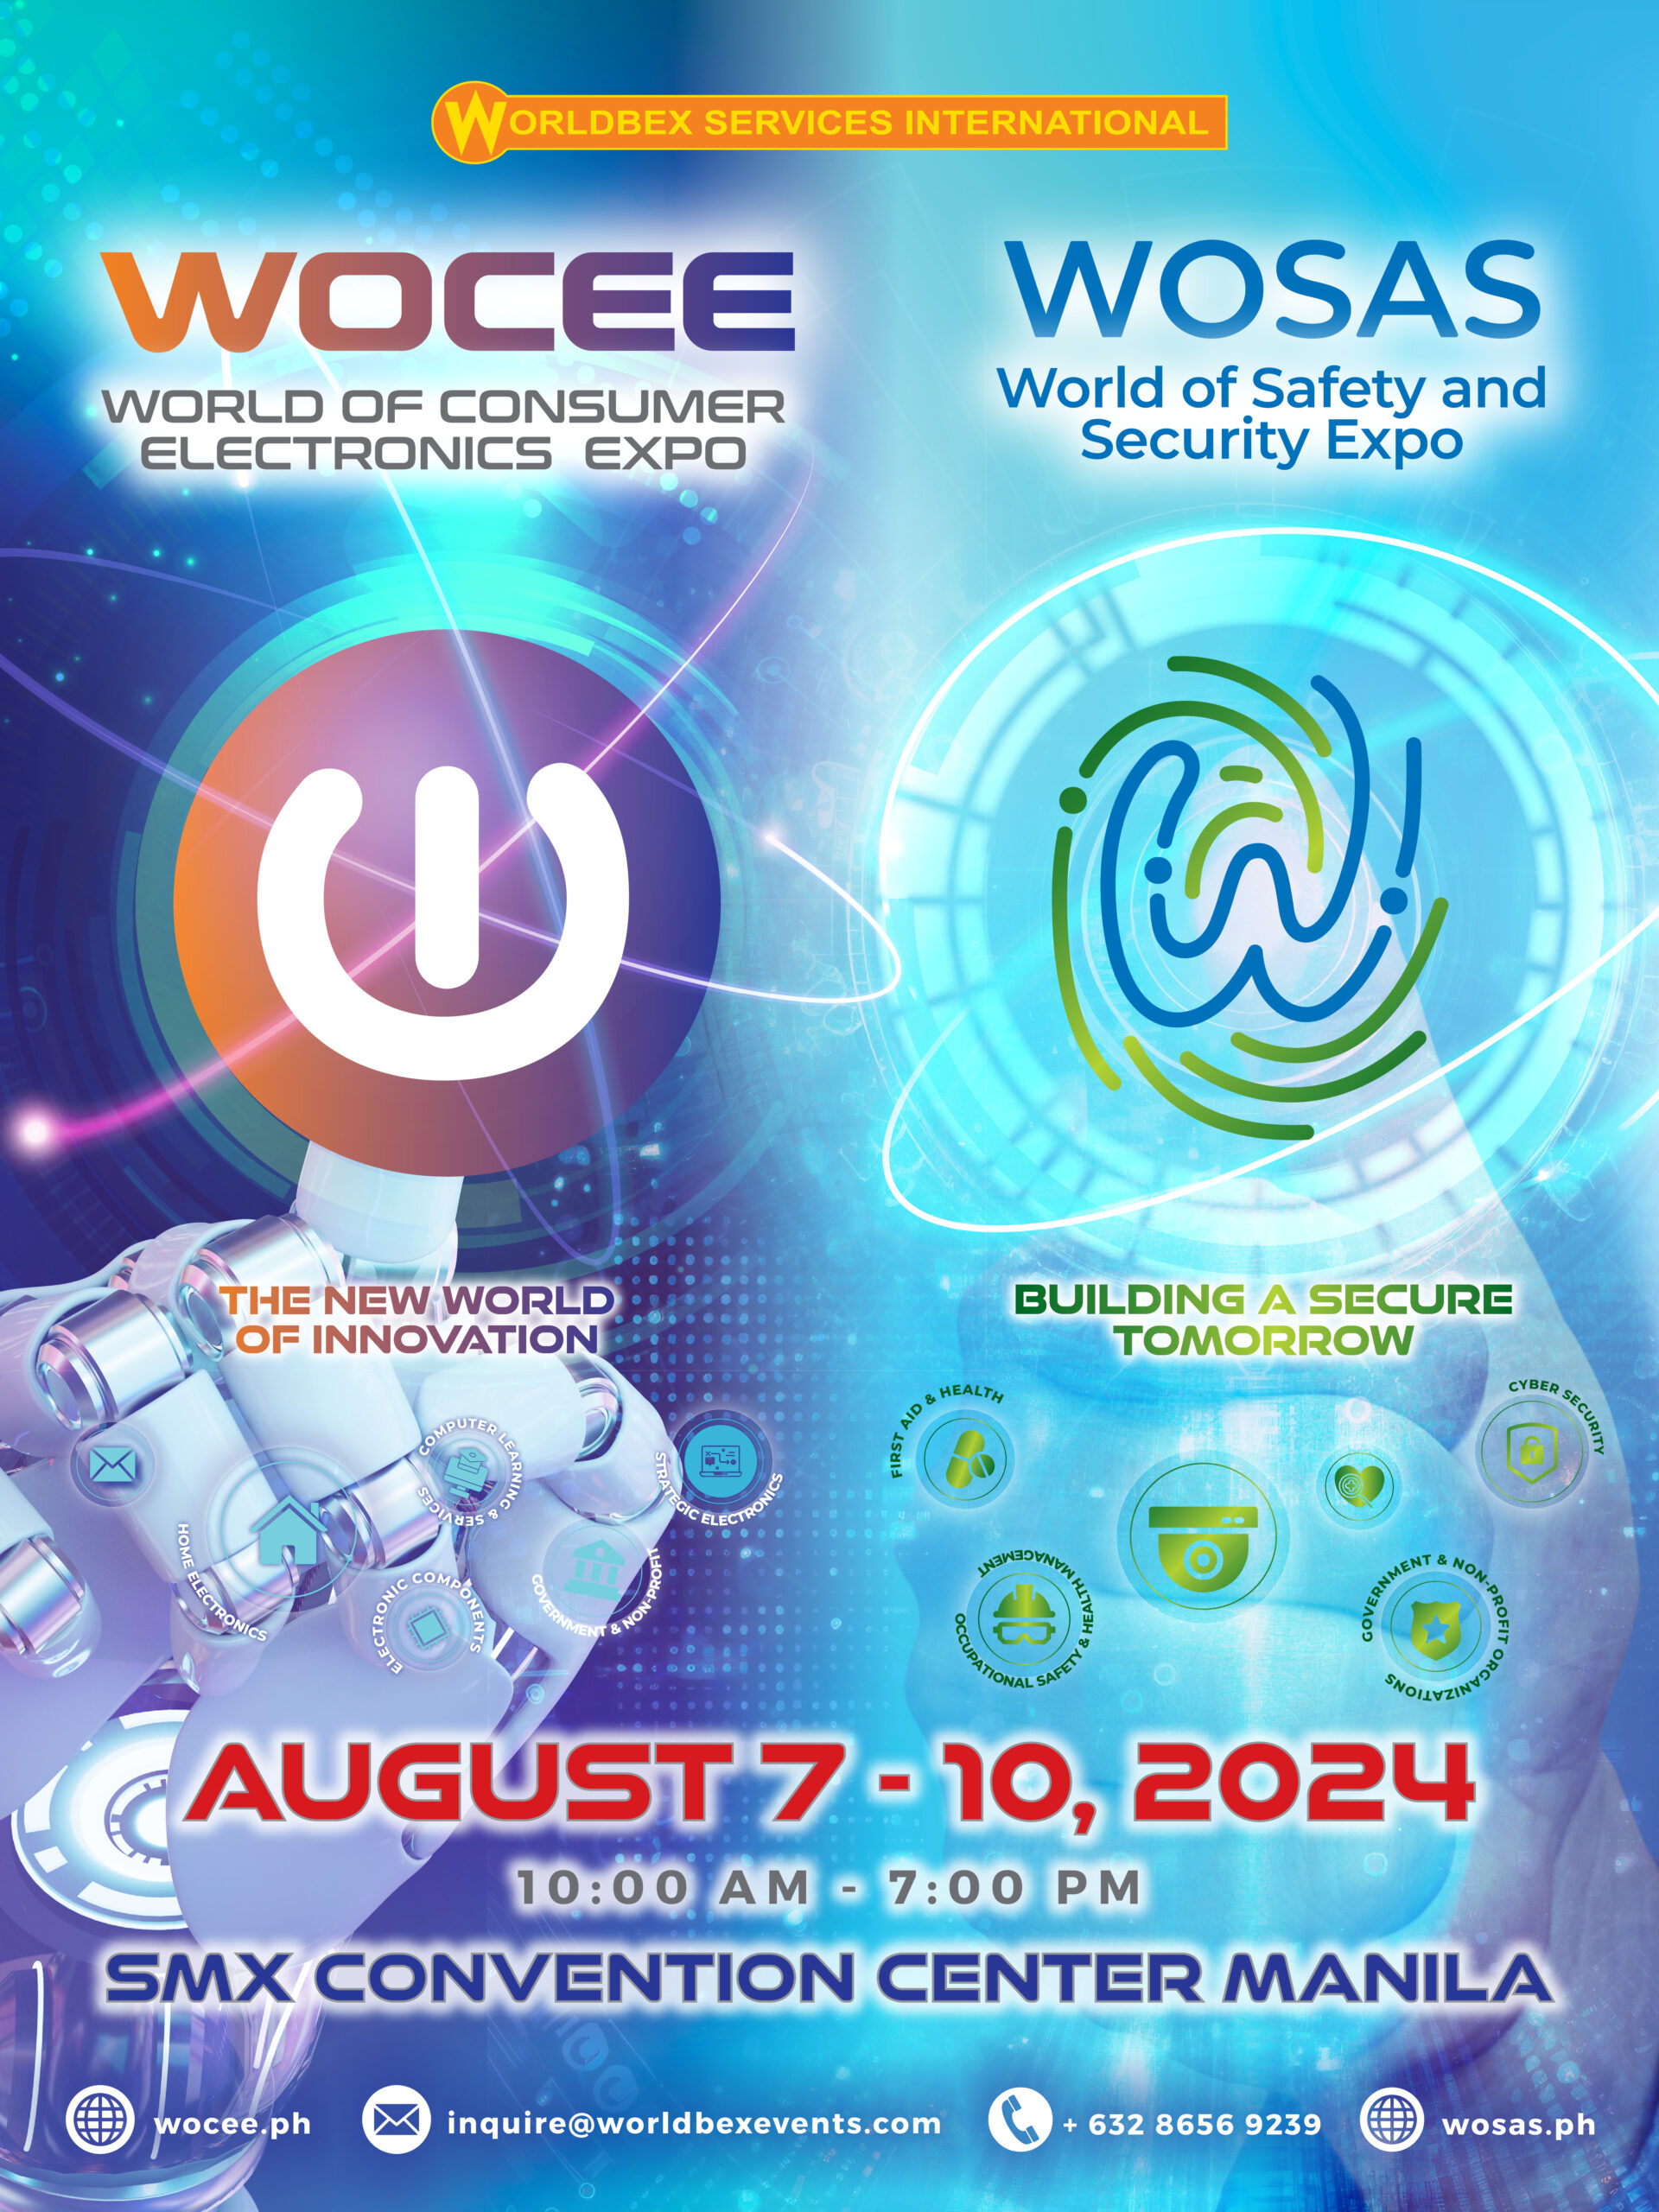 WOCEE and WOSAS: The Leading Tech and Security Hub in the Country